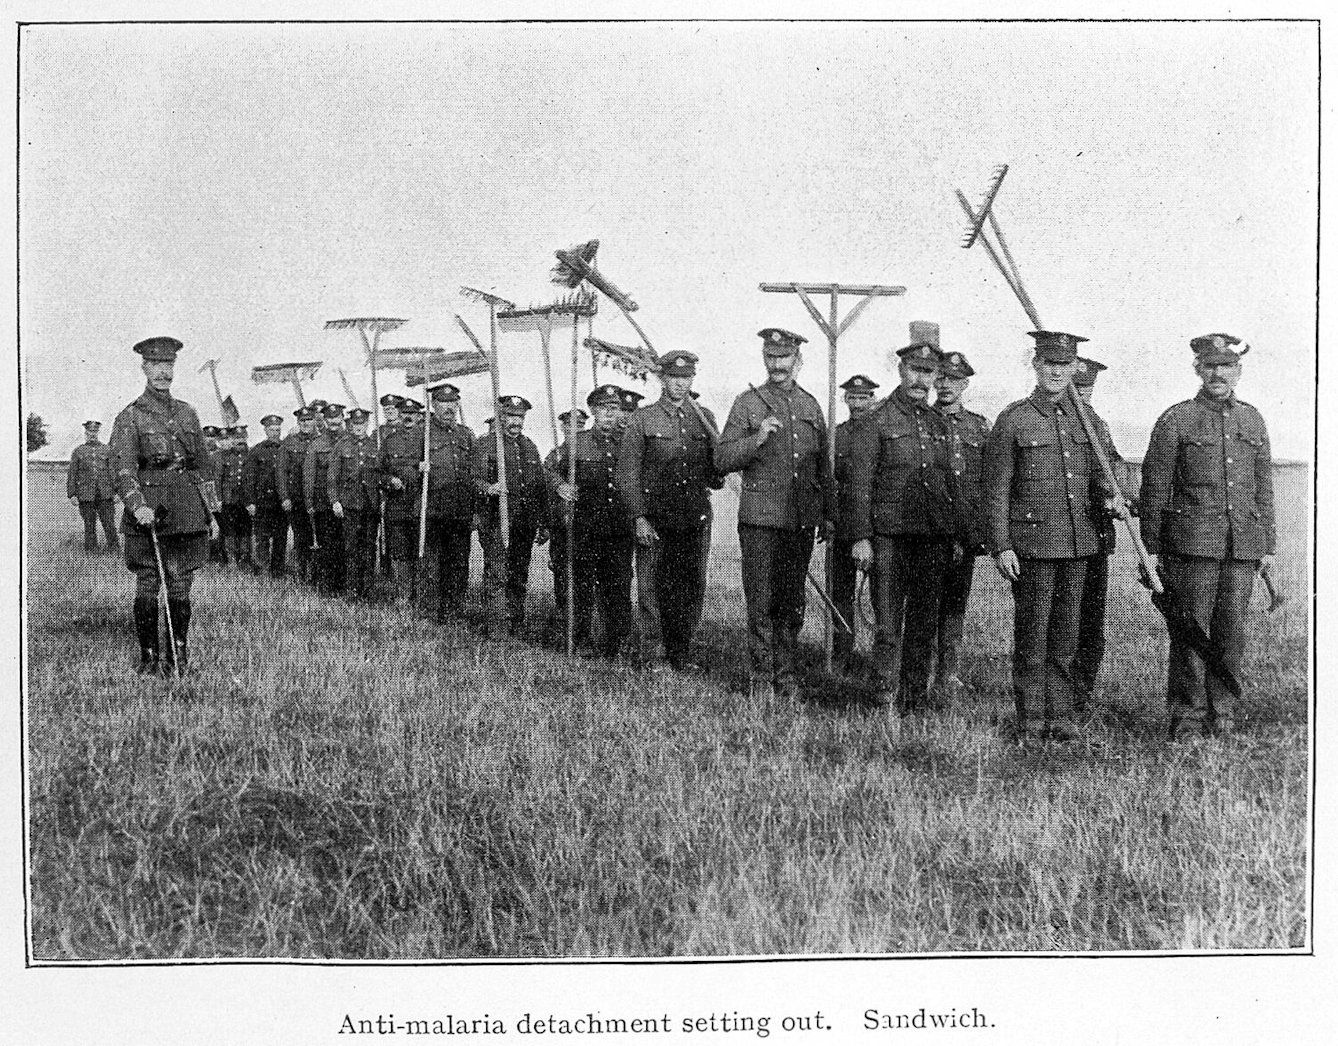 A line of men in military uniform with rakes, spades and other tools over their shoulders standing in a grassy field. Their commander stands to one side of the line. Black and white photograph.